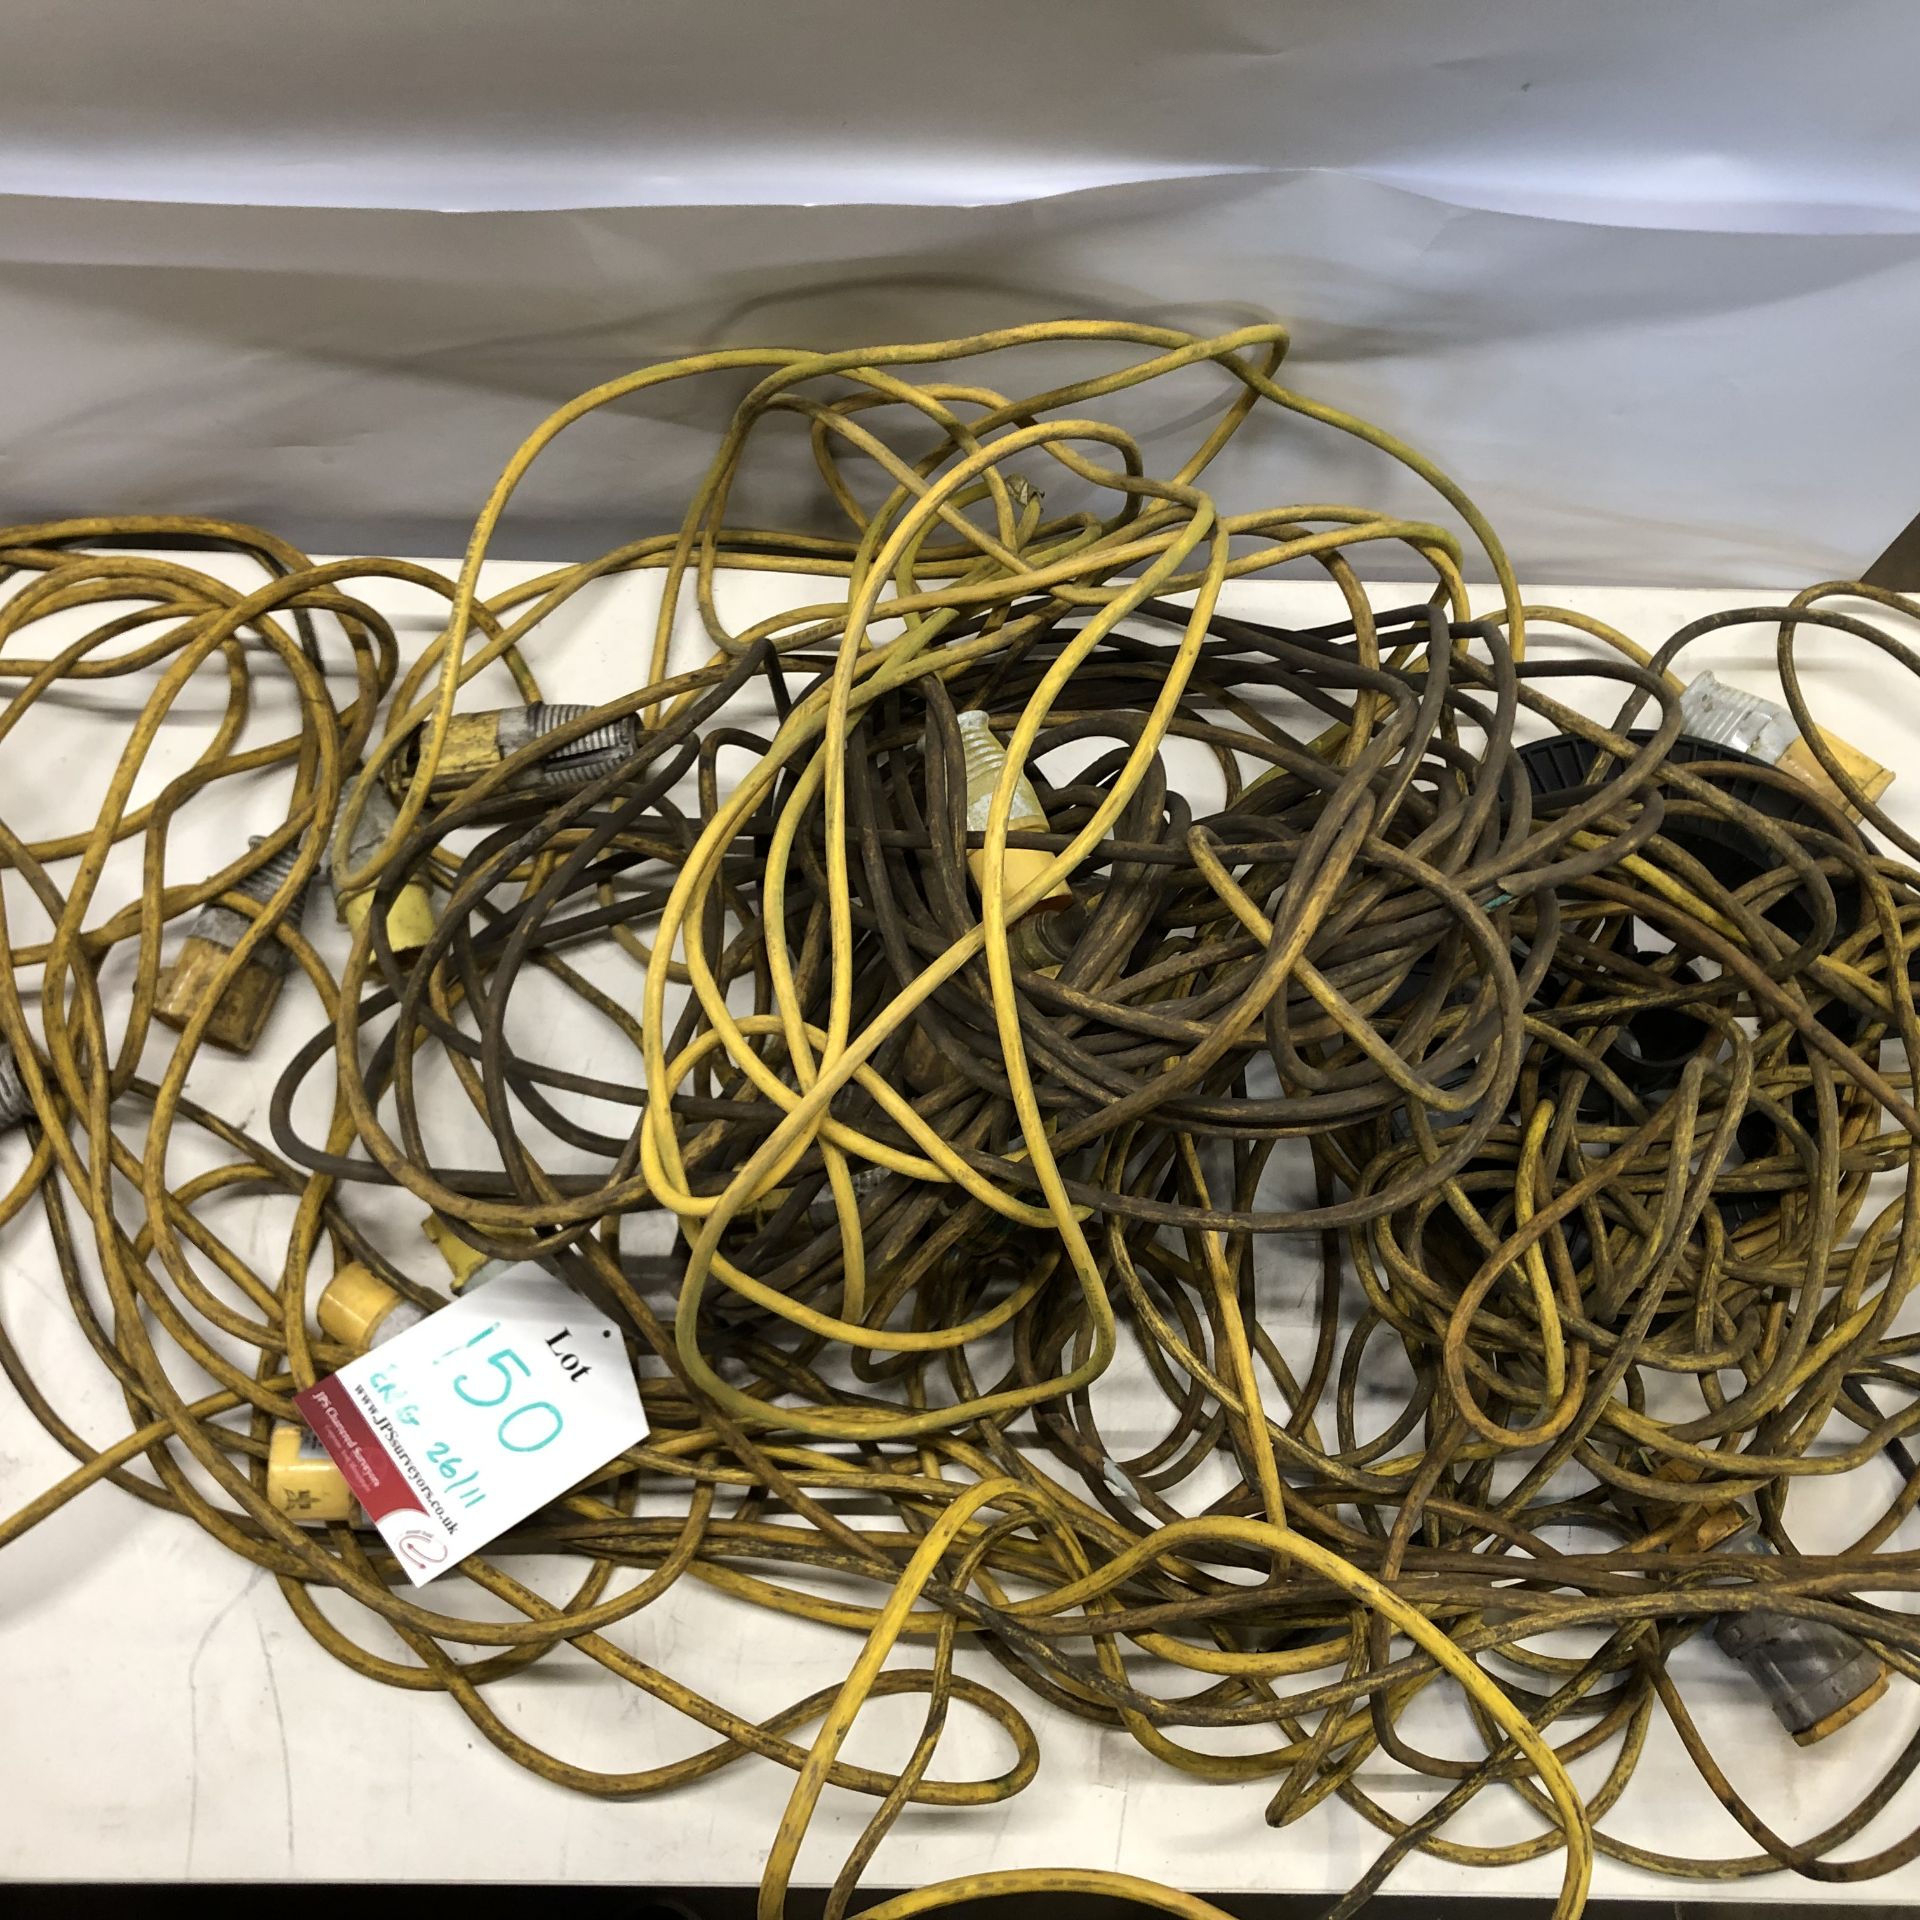 Quantity of 110v single phase extention cables